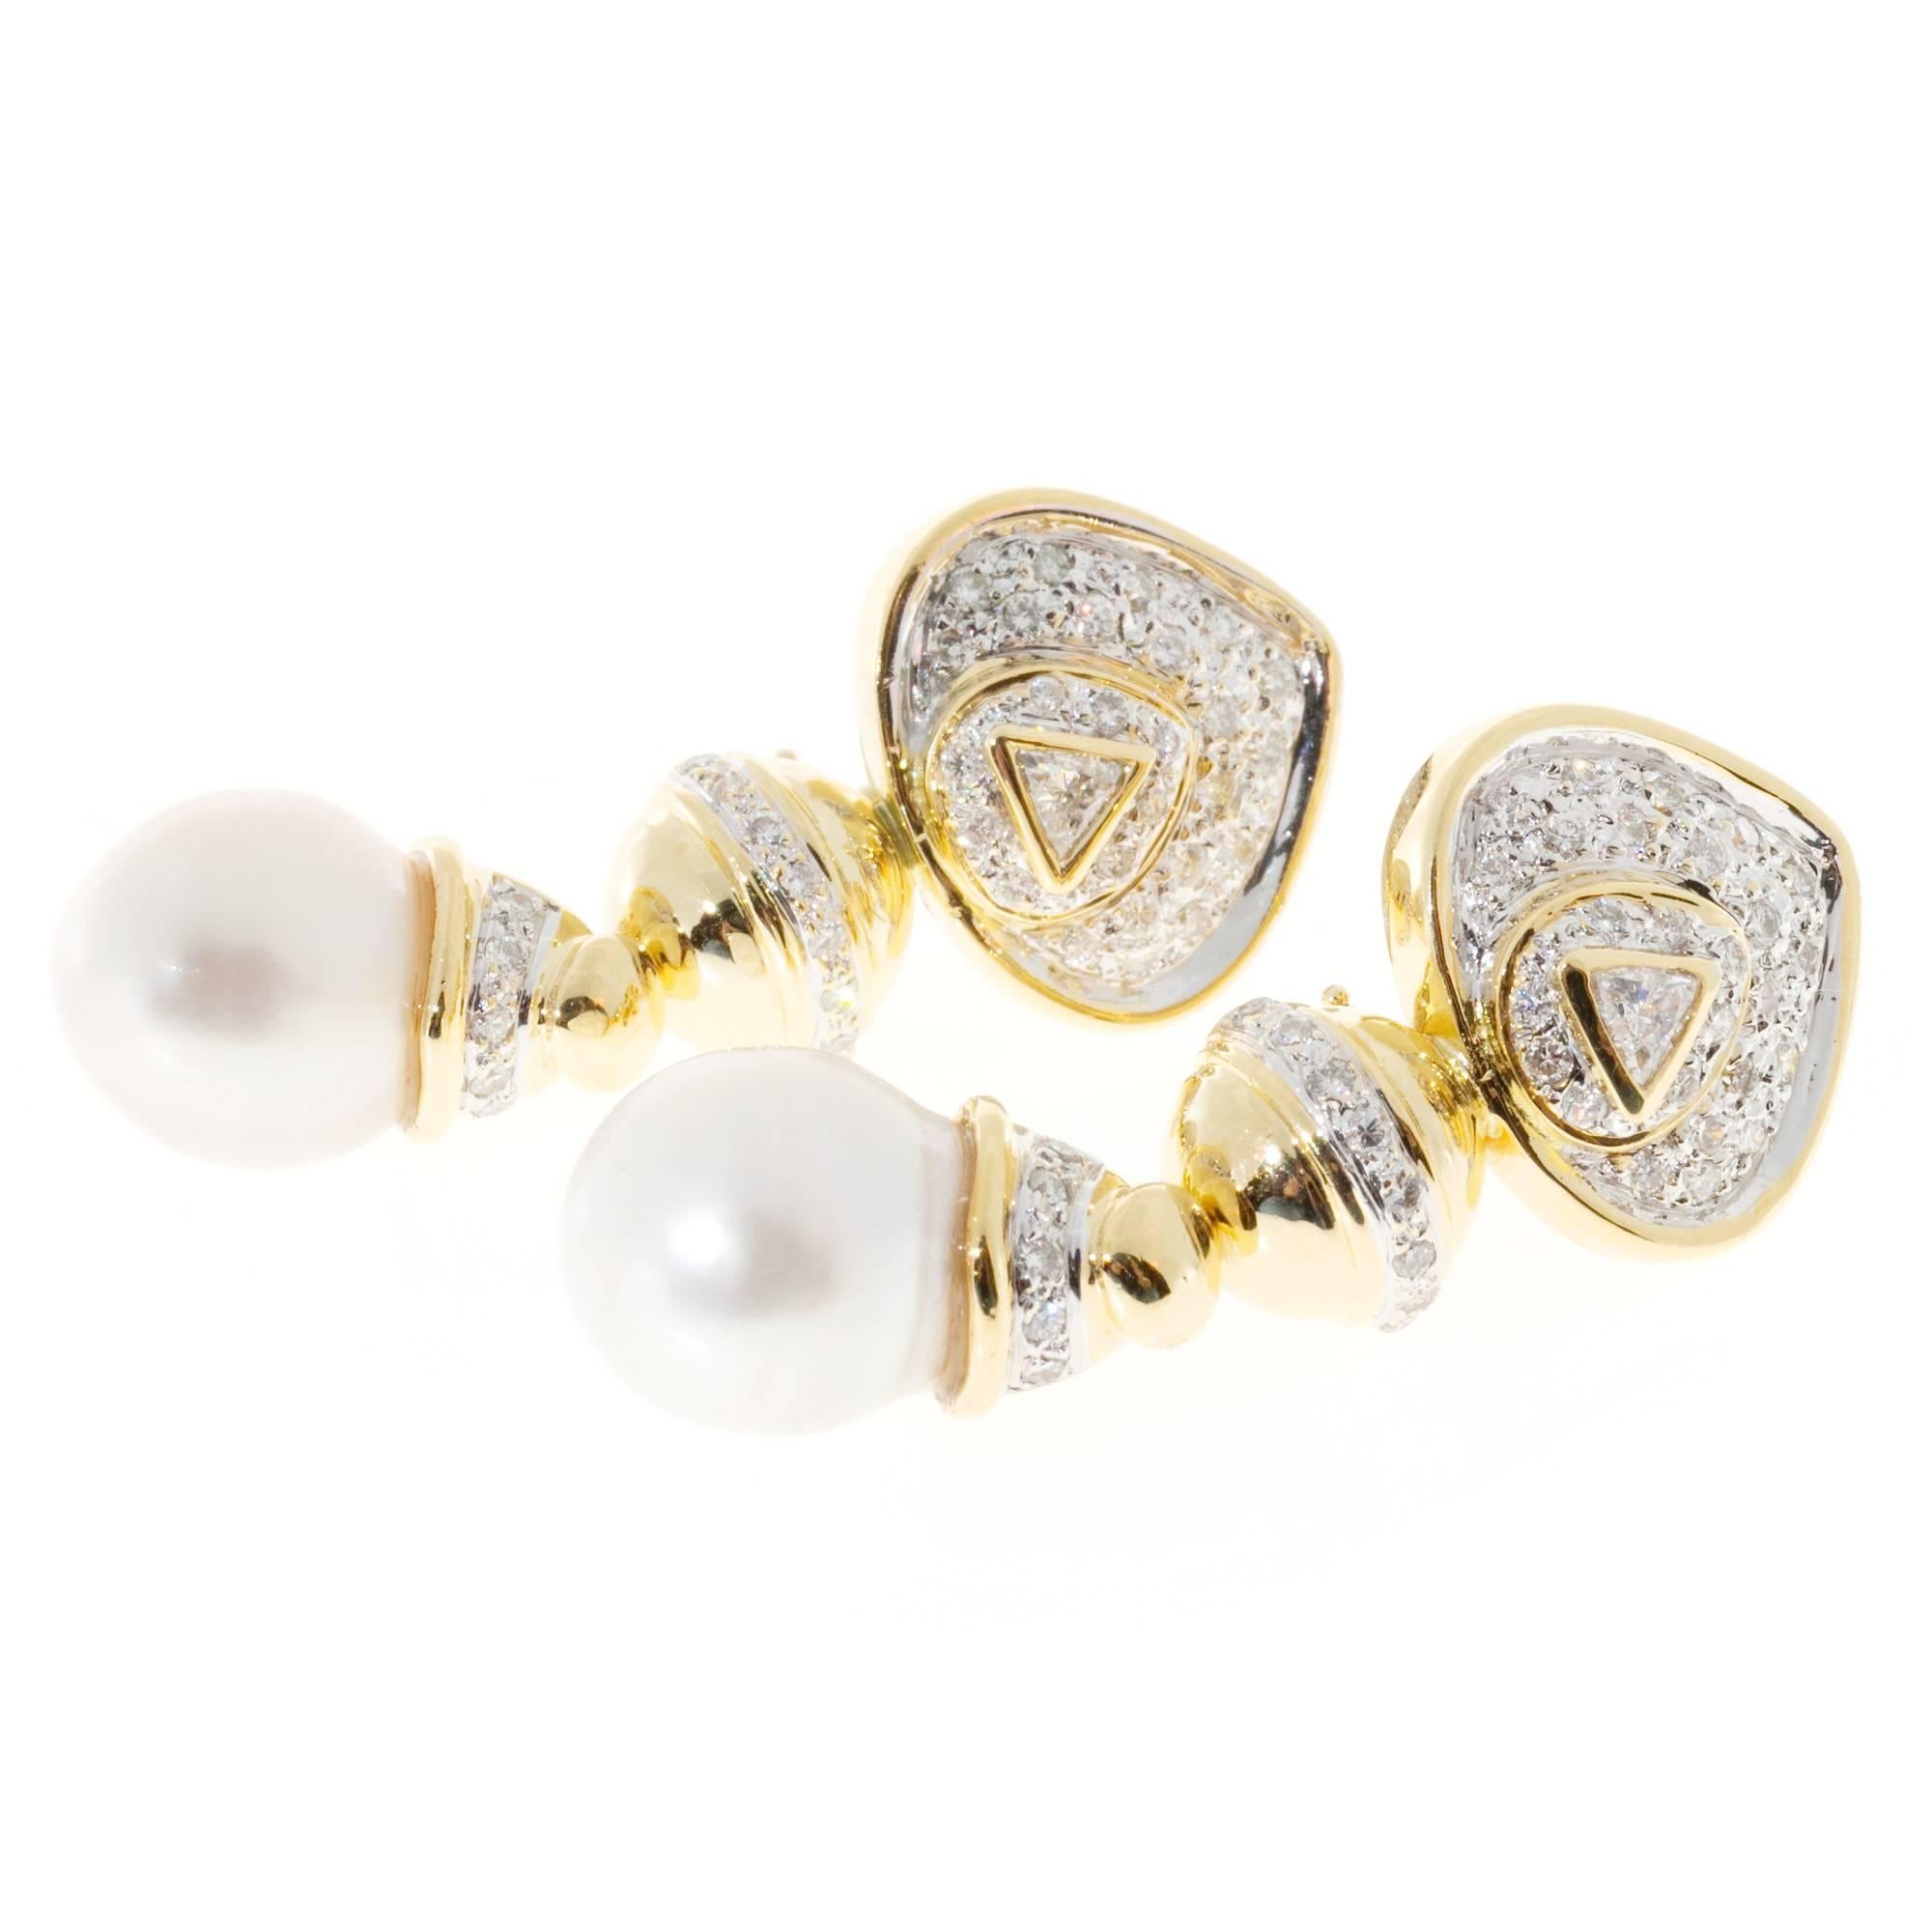 Diamond and South Sea cultured pearl yellow gold Clip and post style dangle earrings.

2 brilliant cut diamonds, approx. total weight .18cts, H, SI1
88 full cut diamonds, approx. total weight .75cts, H, SI1
2 South Sea cultured pearls 11mm,